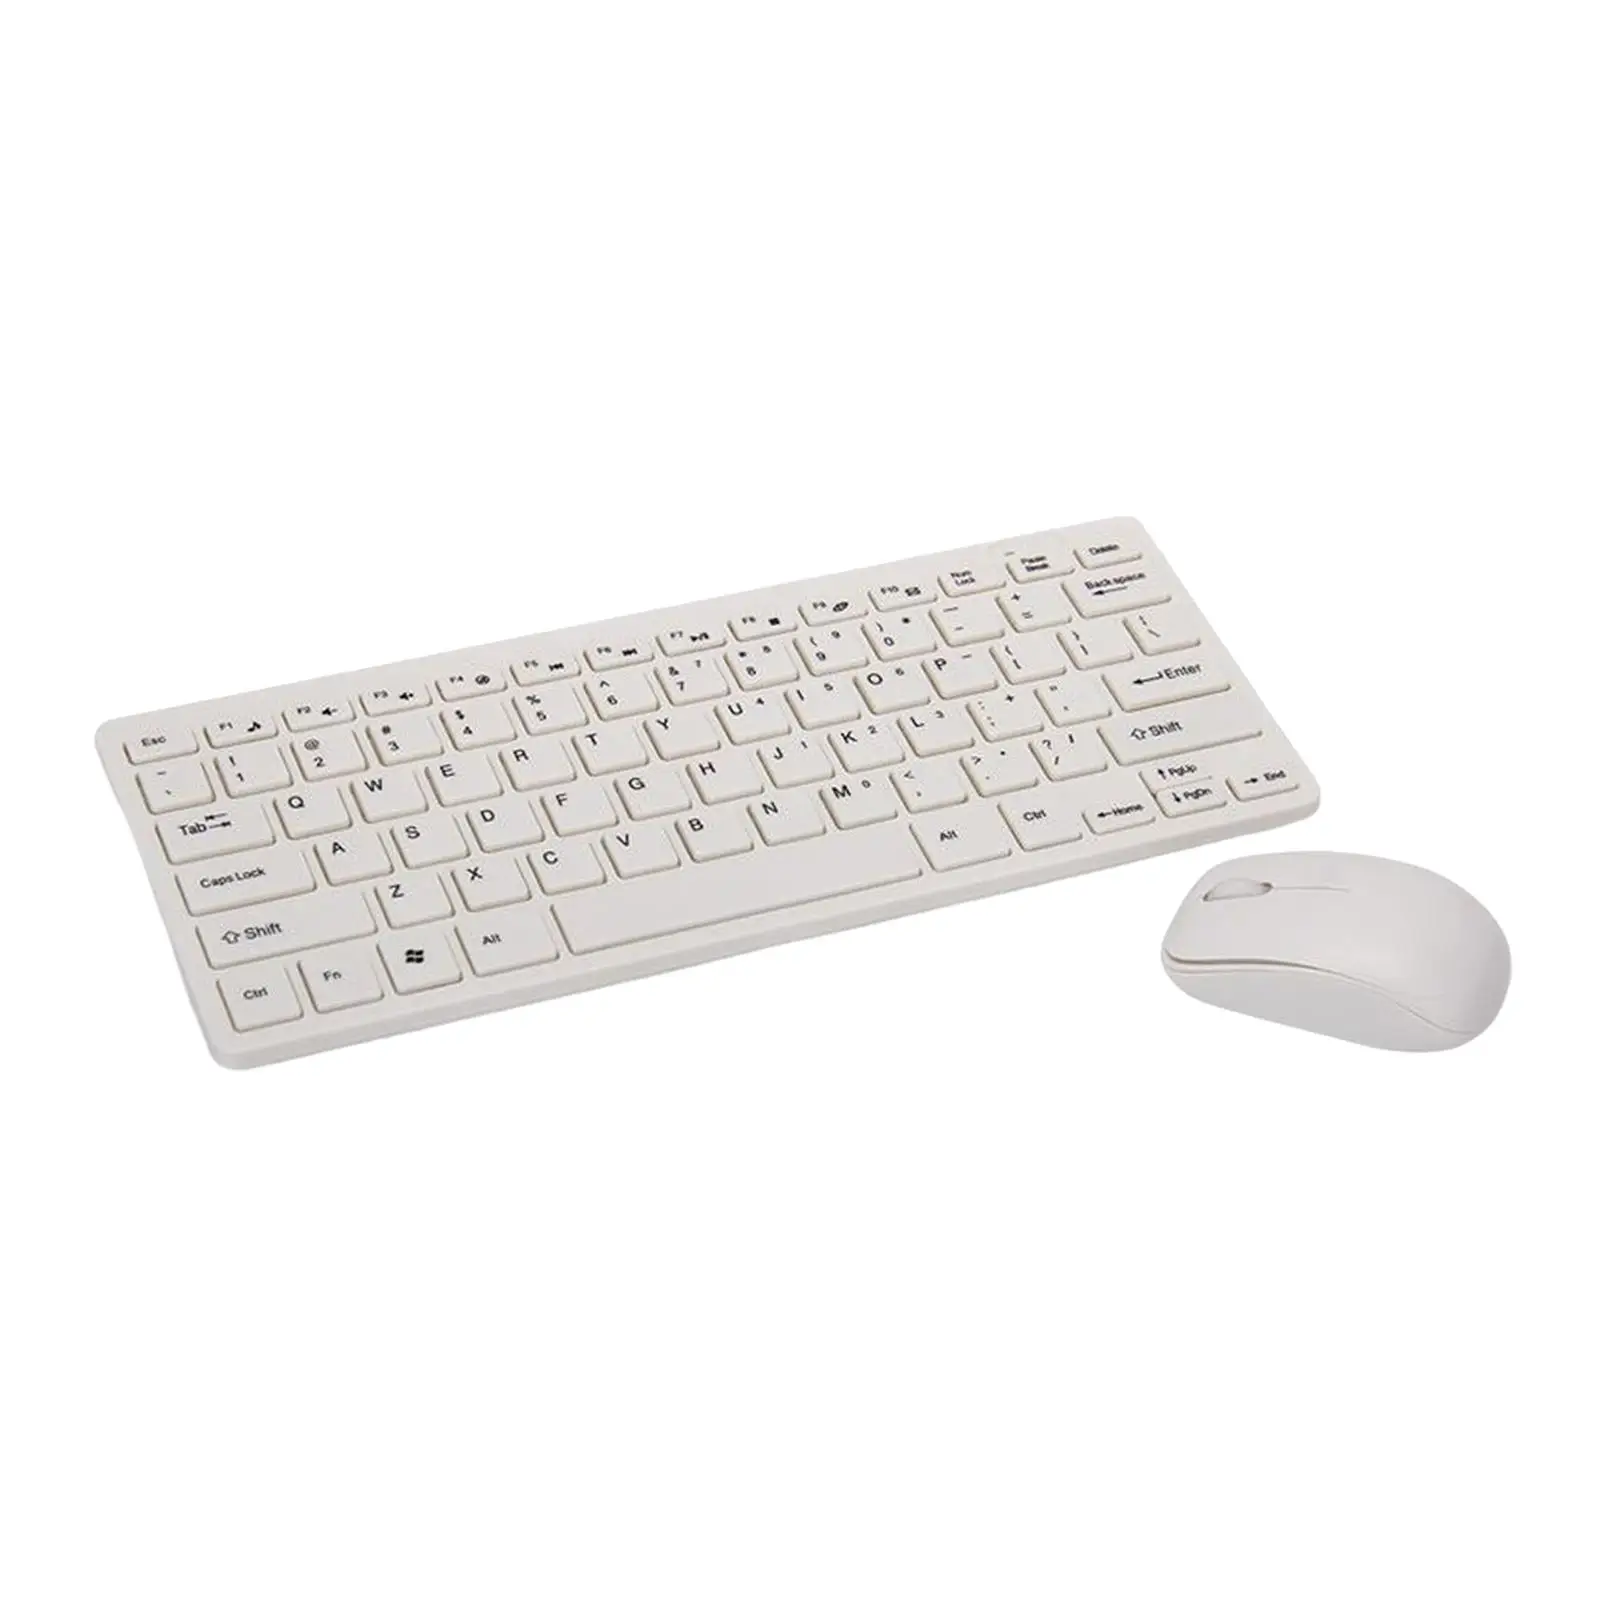 Keyboard and Mouse Combo US Layout Fully Intelligent Sleep Multimedia Functions for Notebook for Windows Vista 7/8/10